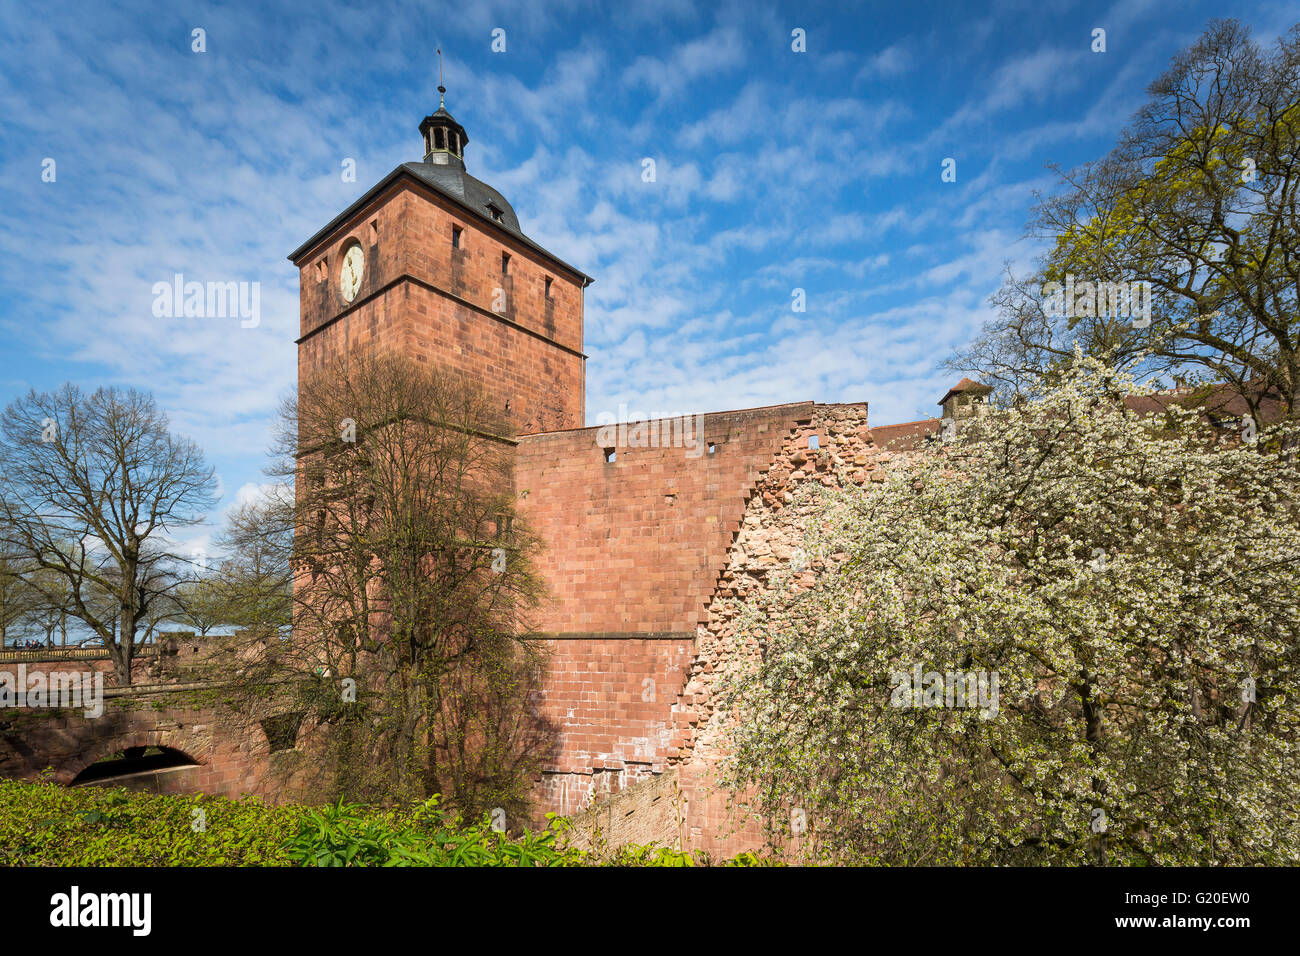 Heidelberg, Germany - the Red Castle and city streets. Stock Photo